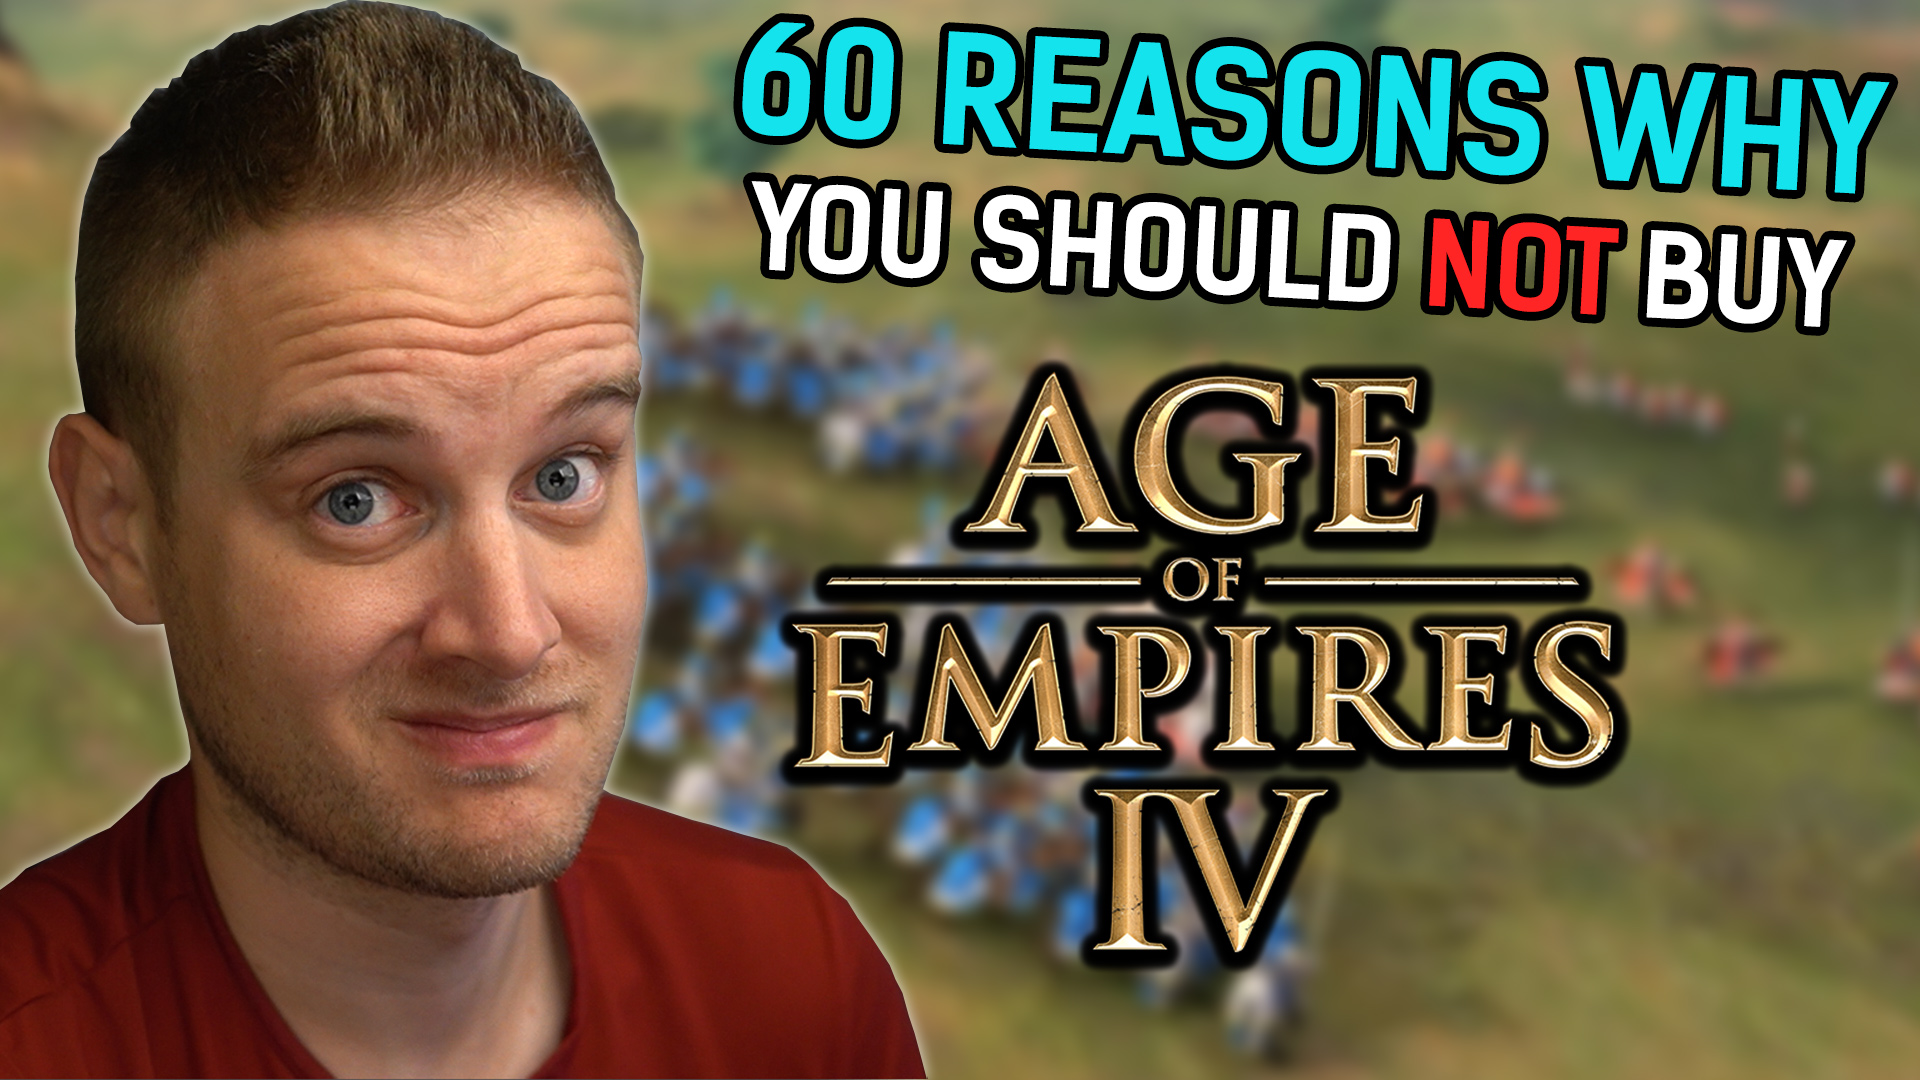 Age of Empires 4 – 60 Reasons why you Shouldn’t Buy